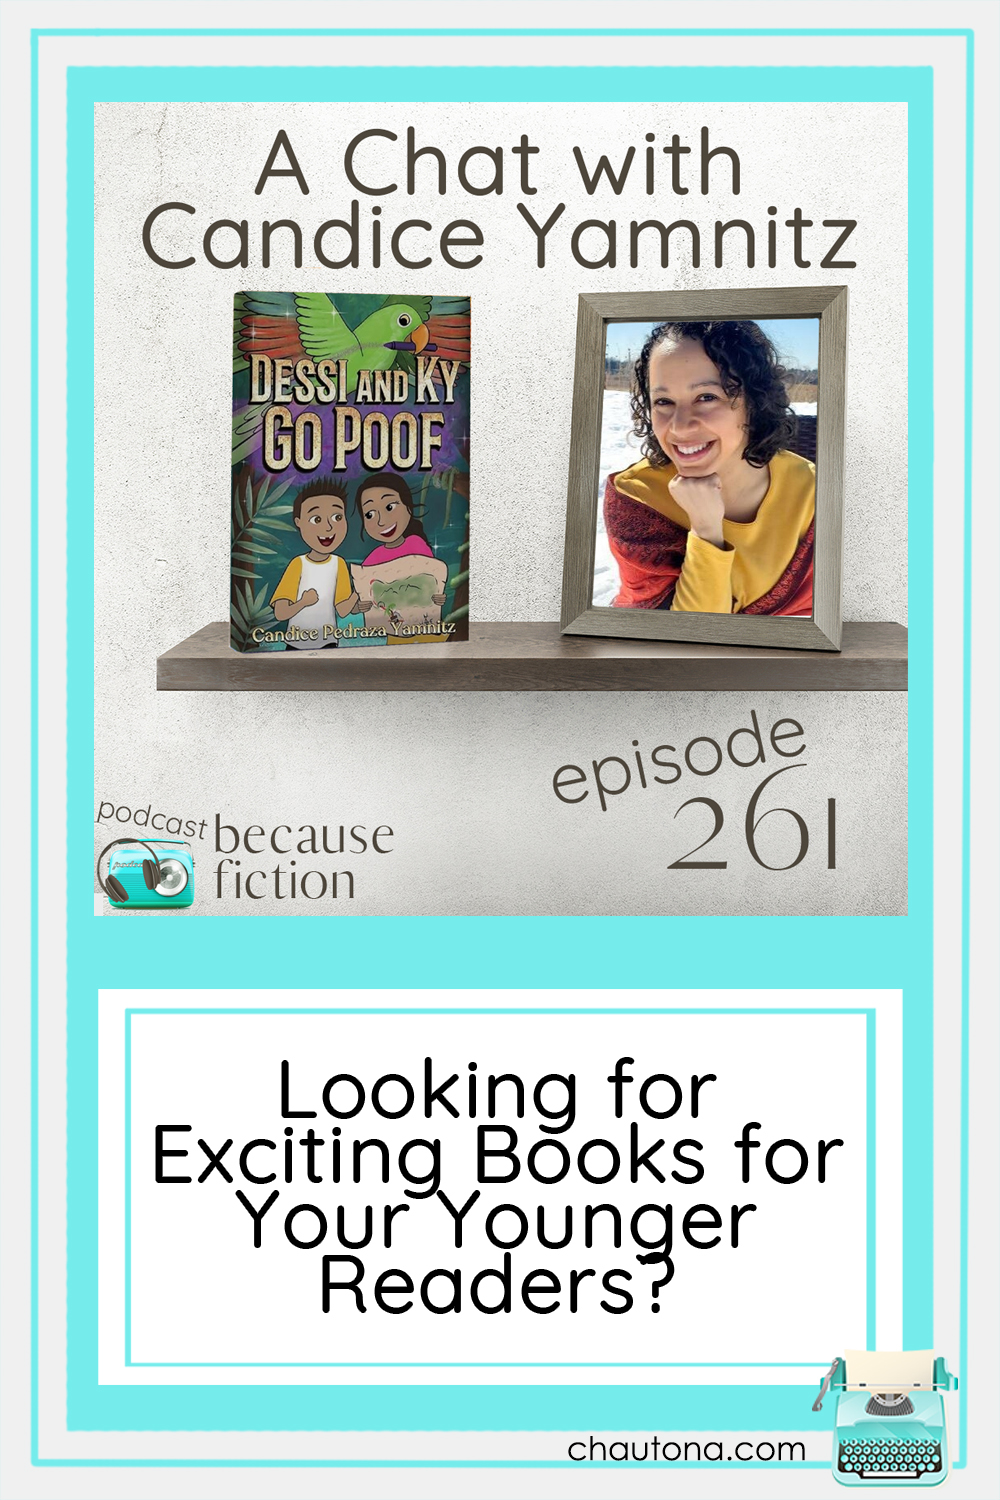 If you're looking for an exciting and uplifting read for your youngsters, Candice Yamnitz has exactly what you might be looking for. via @chautonahavig